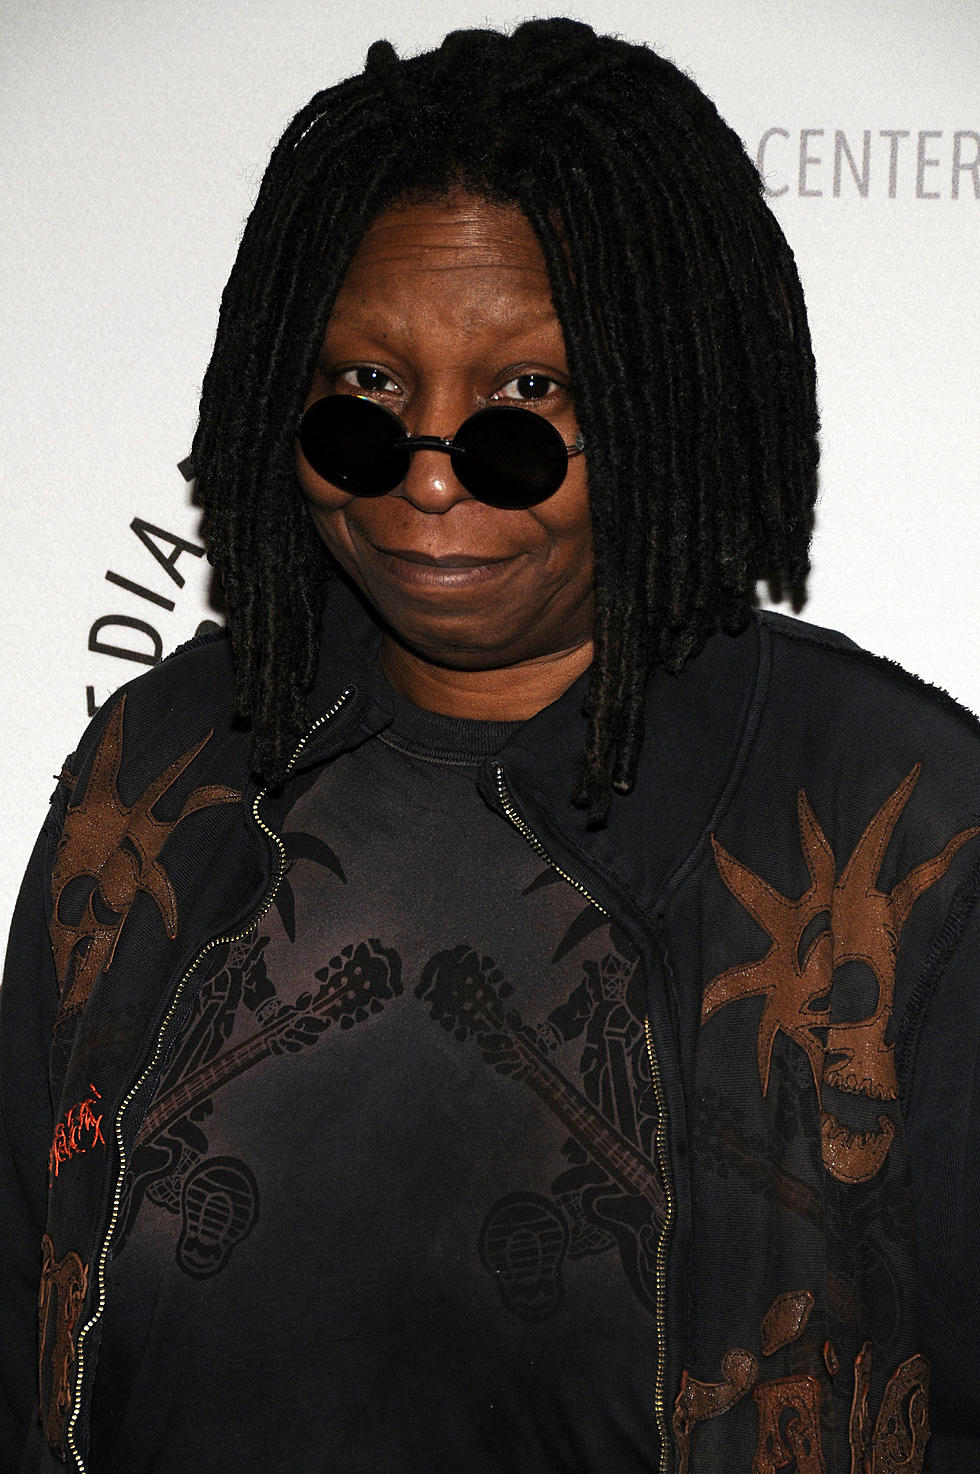 The View’s Whoopi Goldberg Stirs Up Controversy…Again